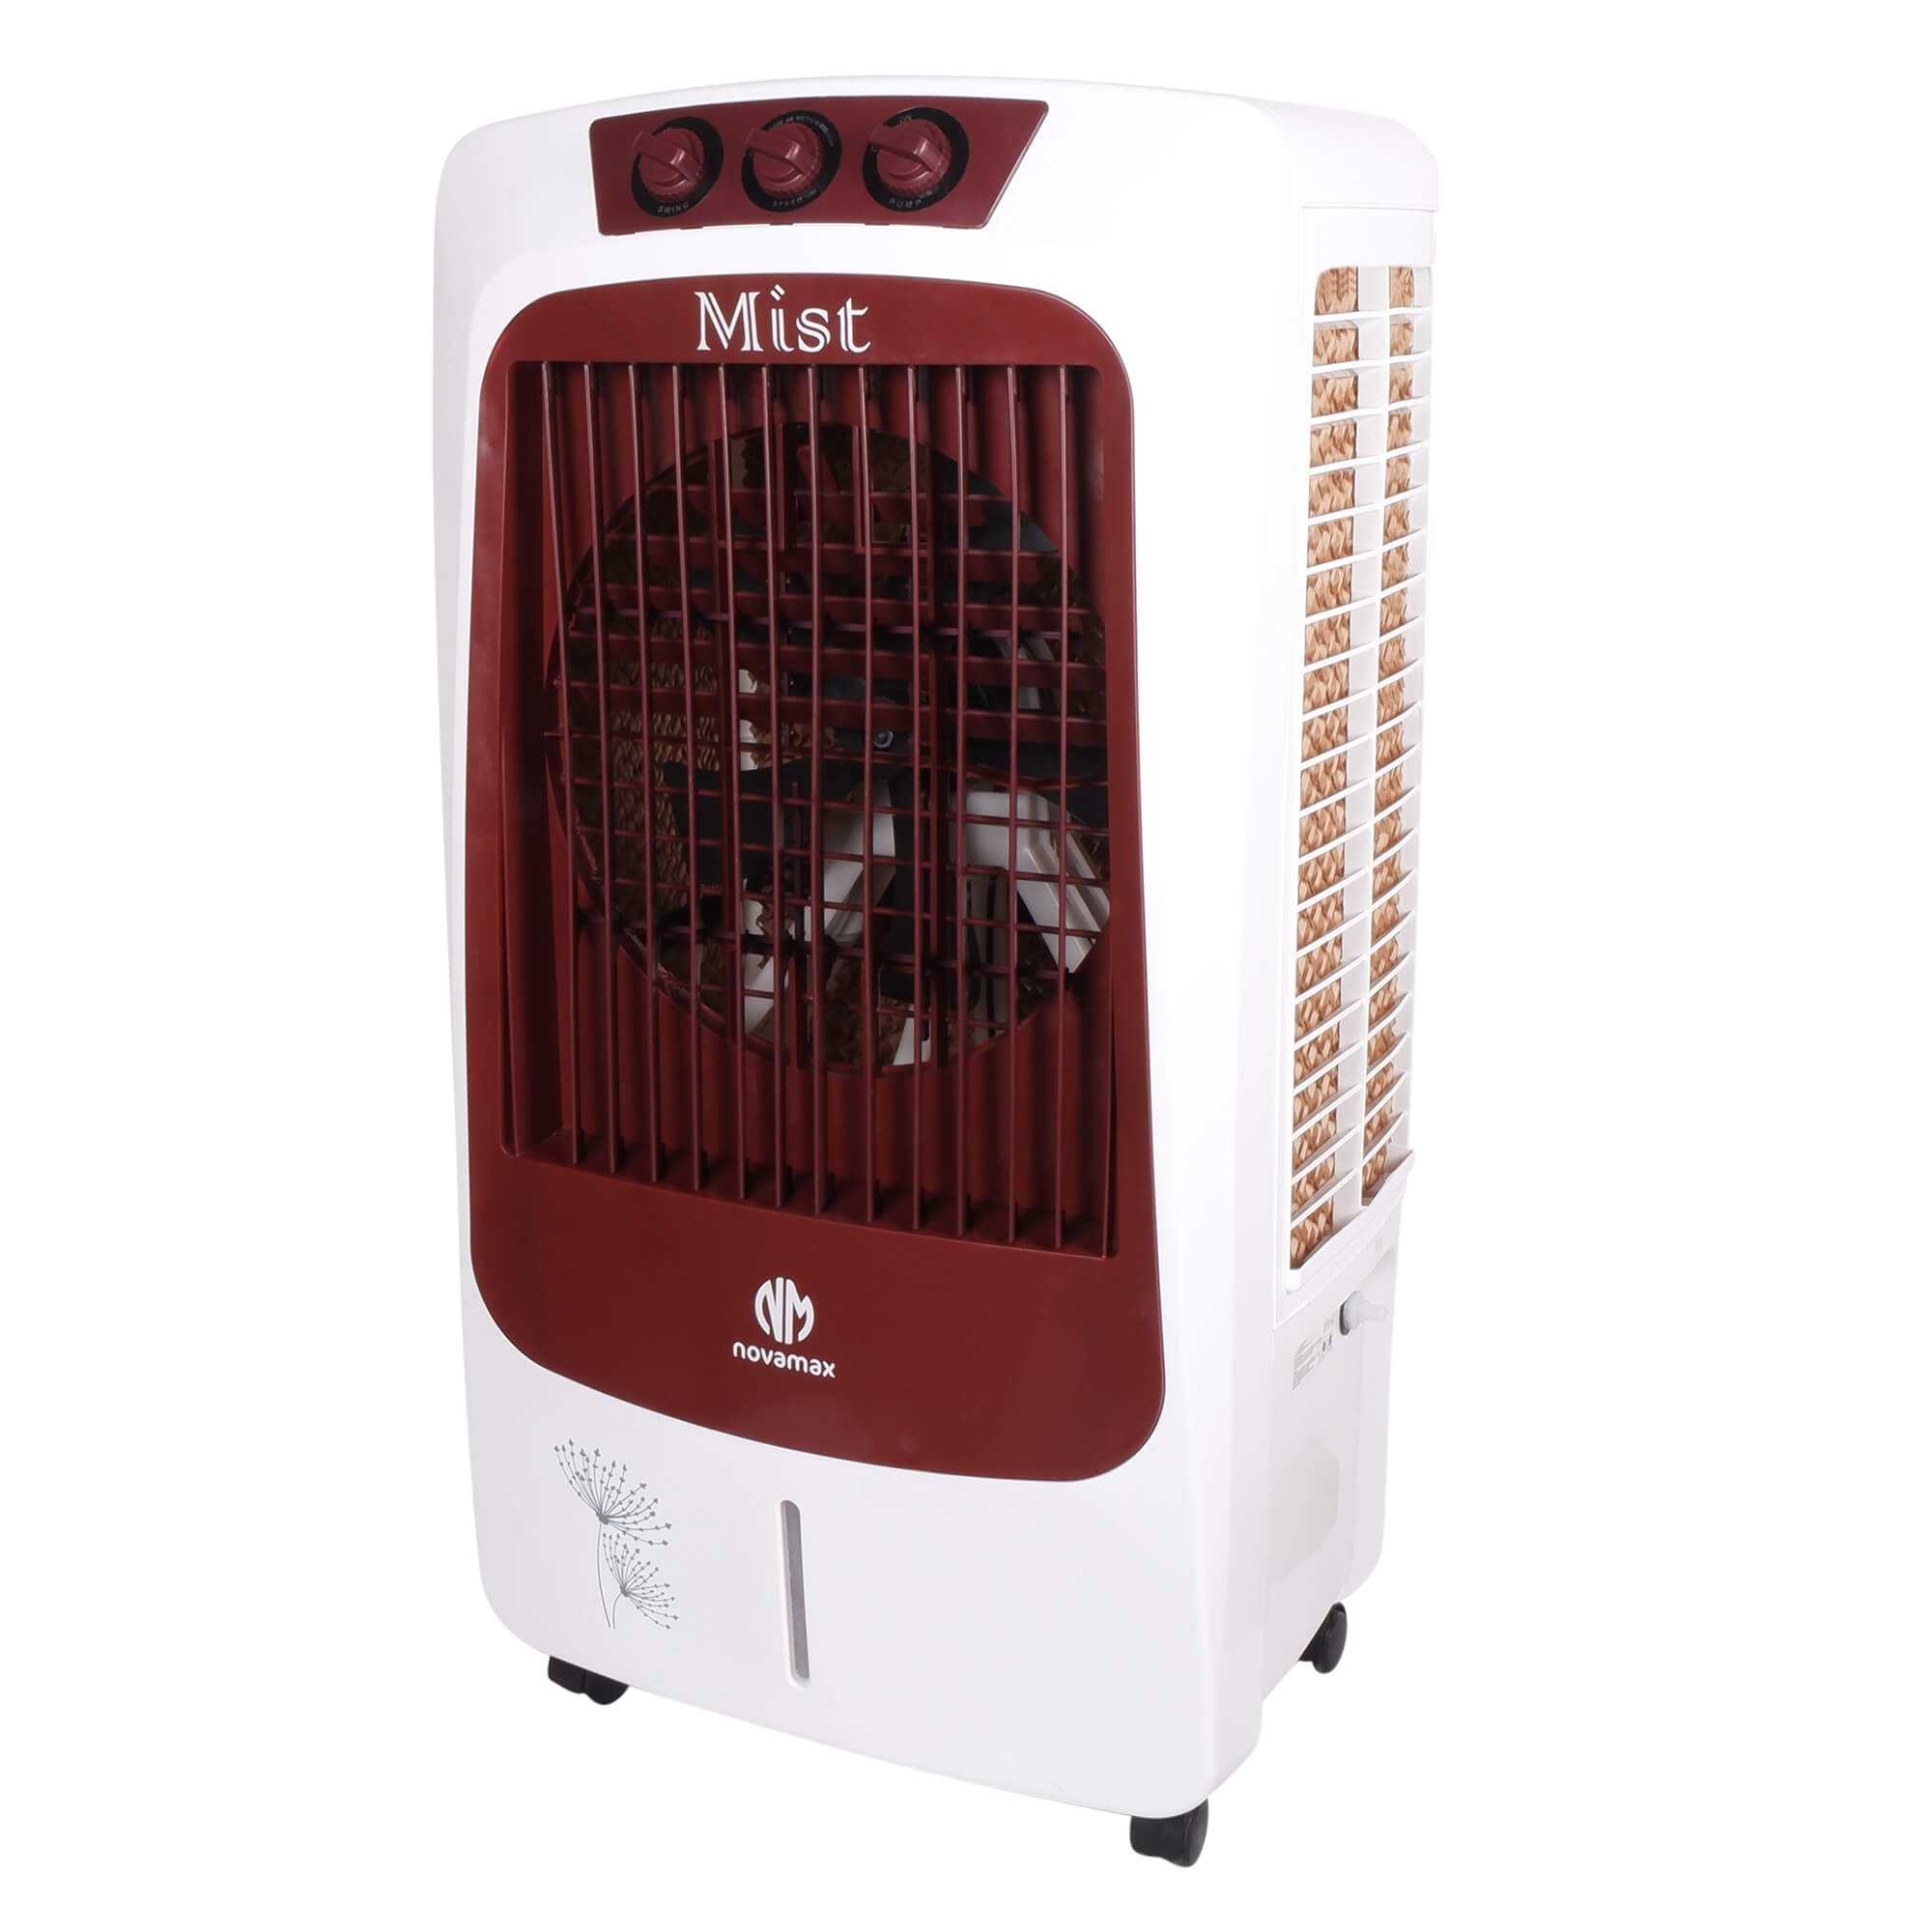 Novamax Mist 75 L Desert Air Cooler With High Density Honeycomb Cooling Pads, Auto Swing Technology, Powerful Air Throw, With Low Power Consumption (Burgundy)